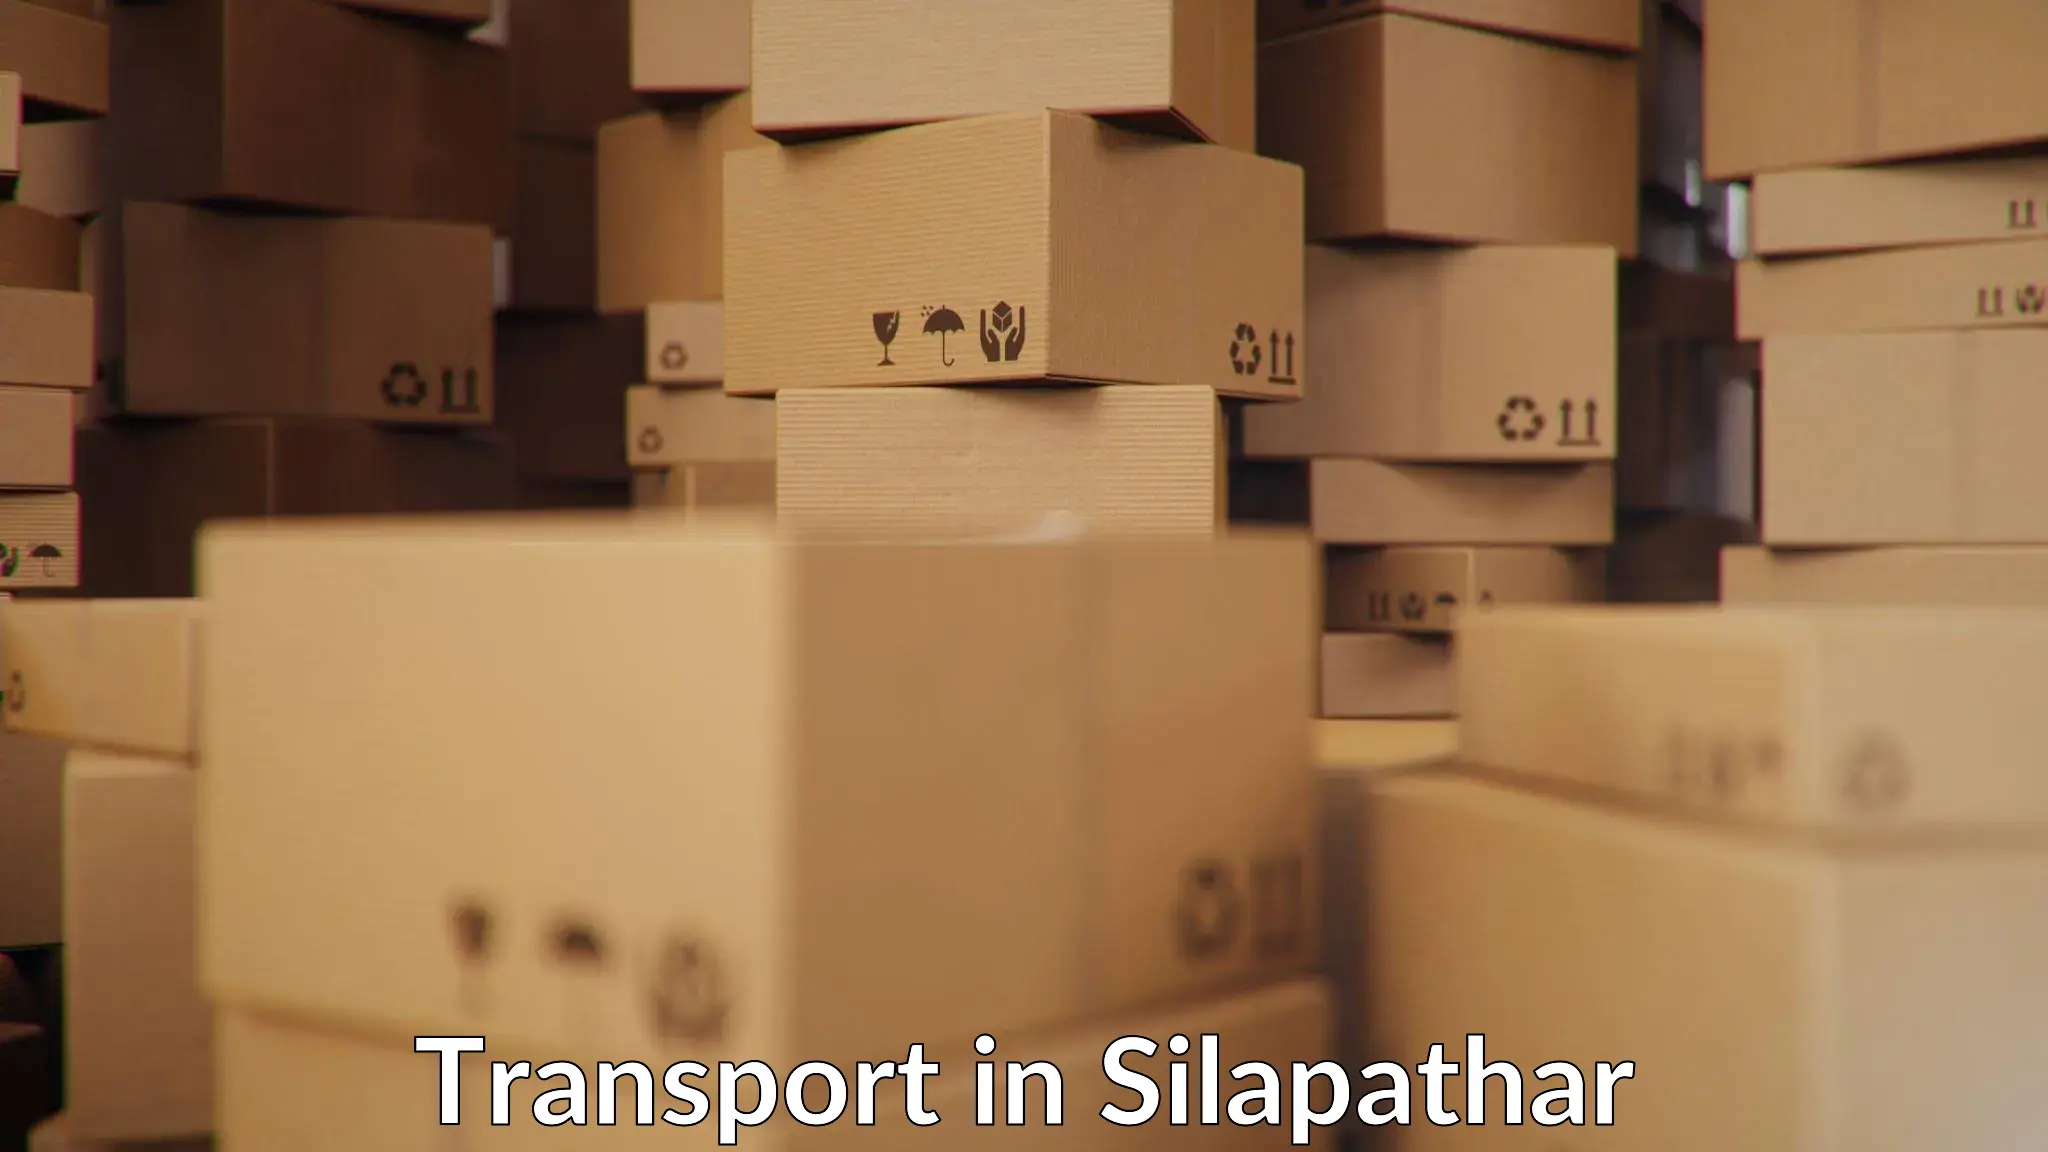 Daily transport service in Silapathar